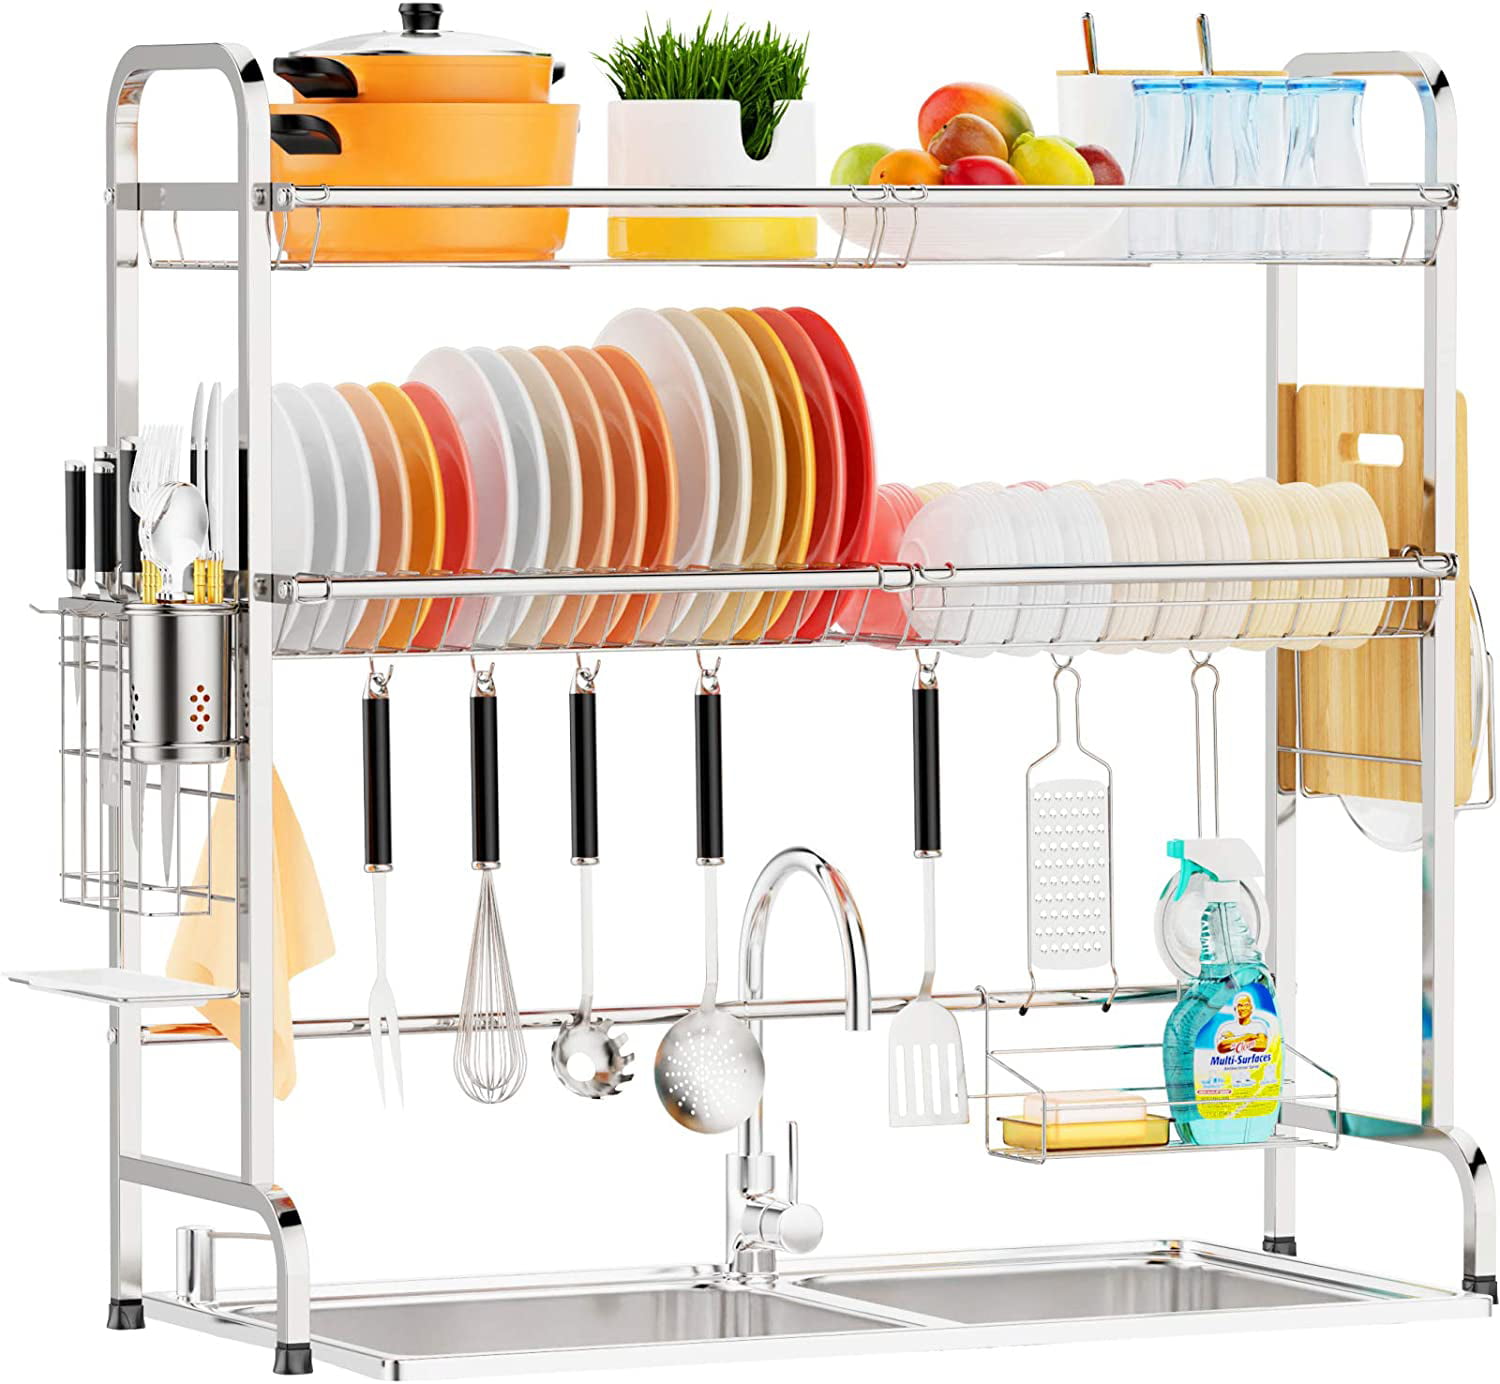 iSPECLE 2-Tier Large 201 Stainless Steel Dish Rack with Utensil Holder Hooks Stable Bend Foot for Kitchen Counter Non-Slip Over the Sink Dish Drying Rack